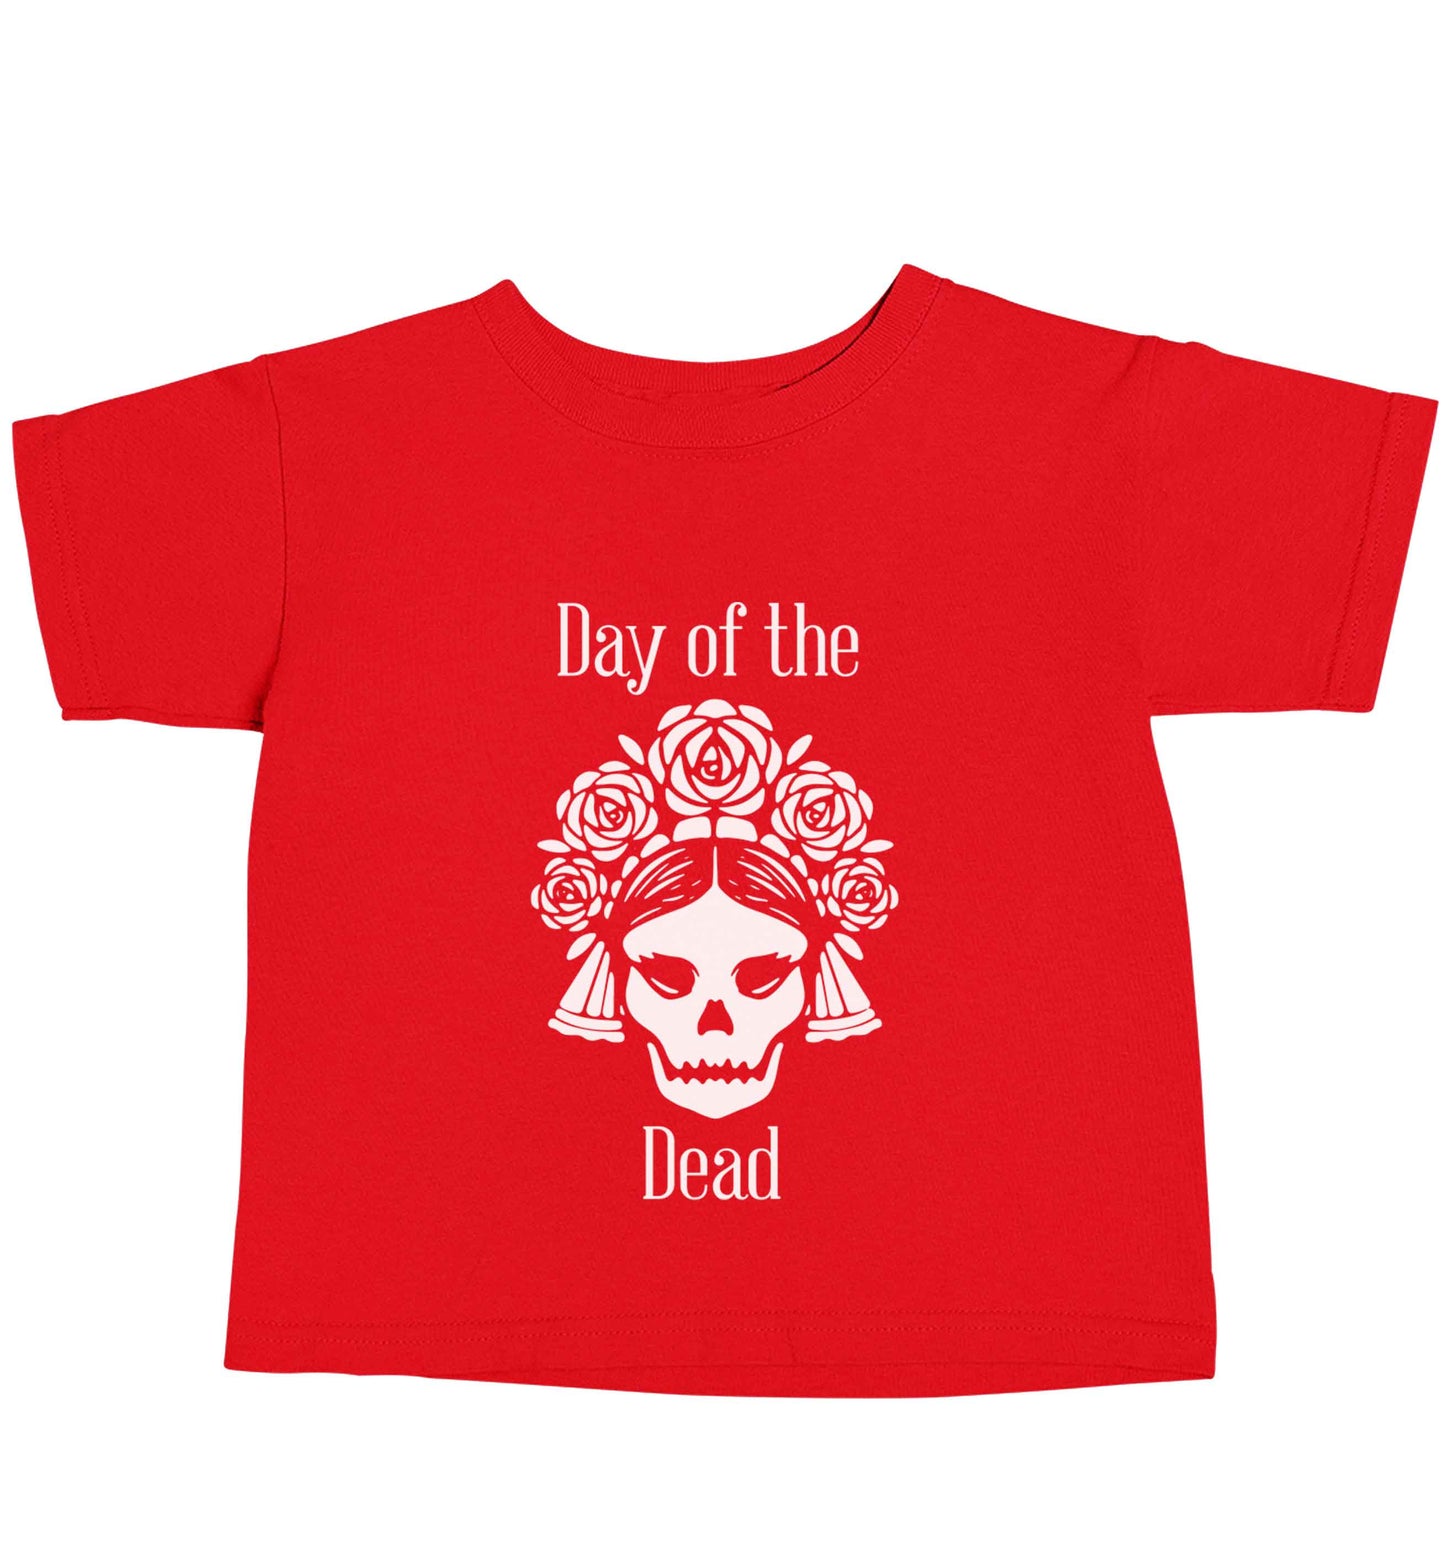 Day of the dead red baby toddler Tshirt 2 Years